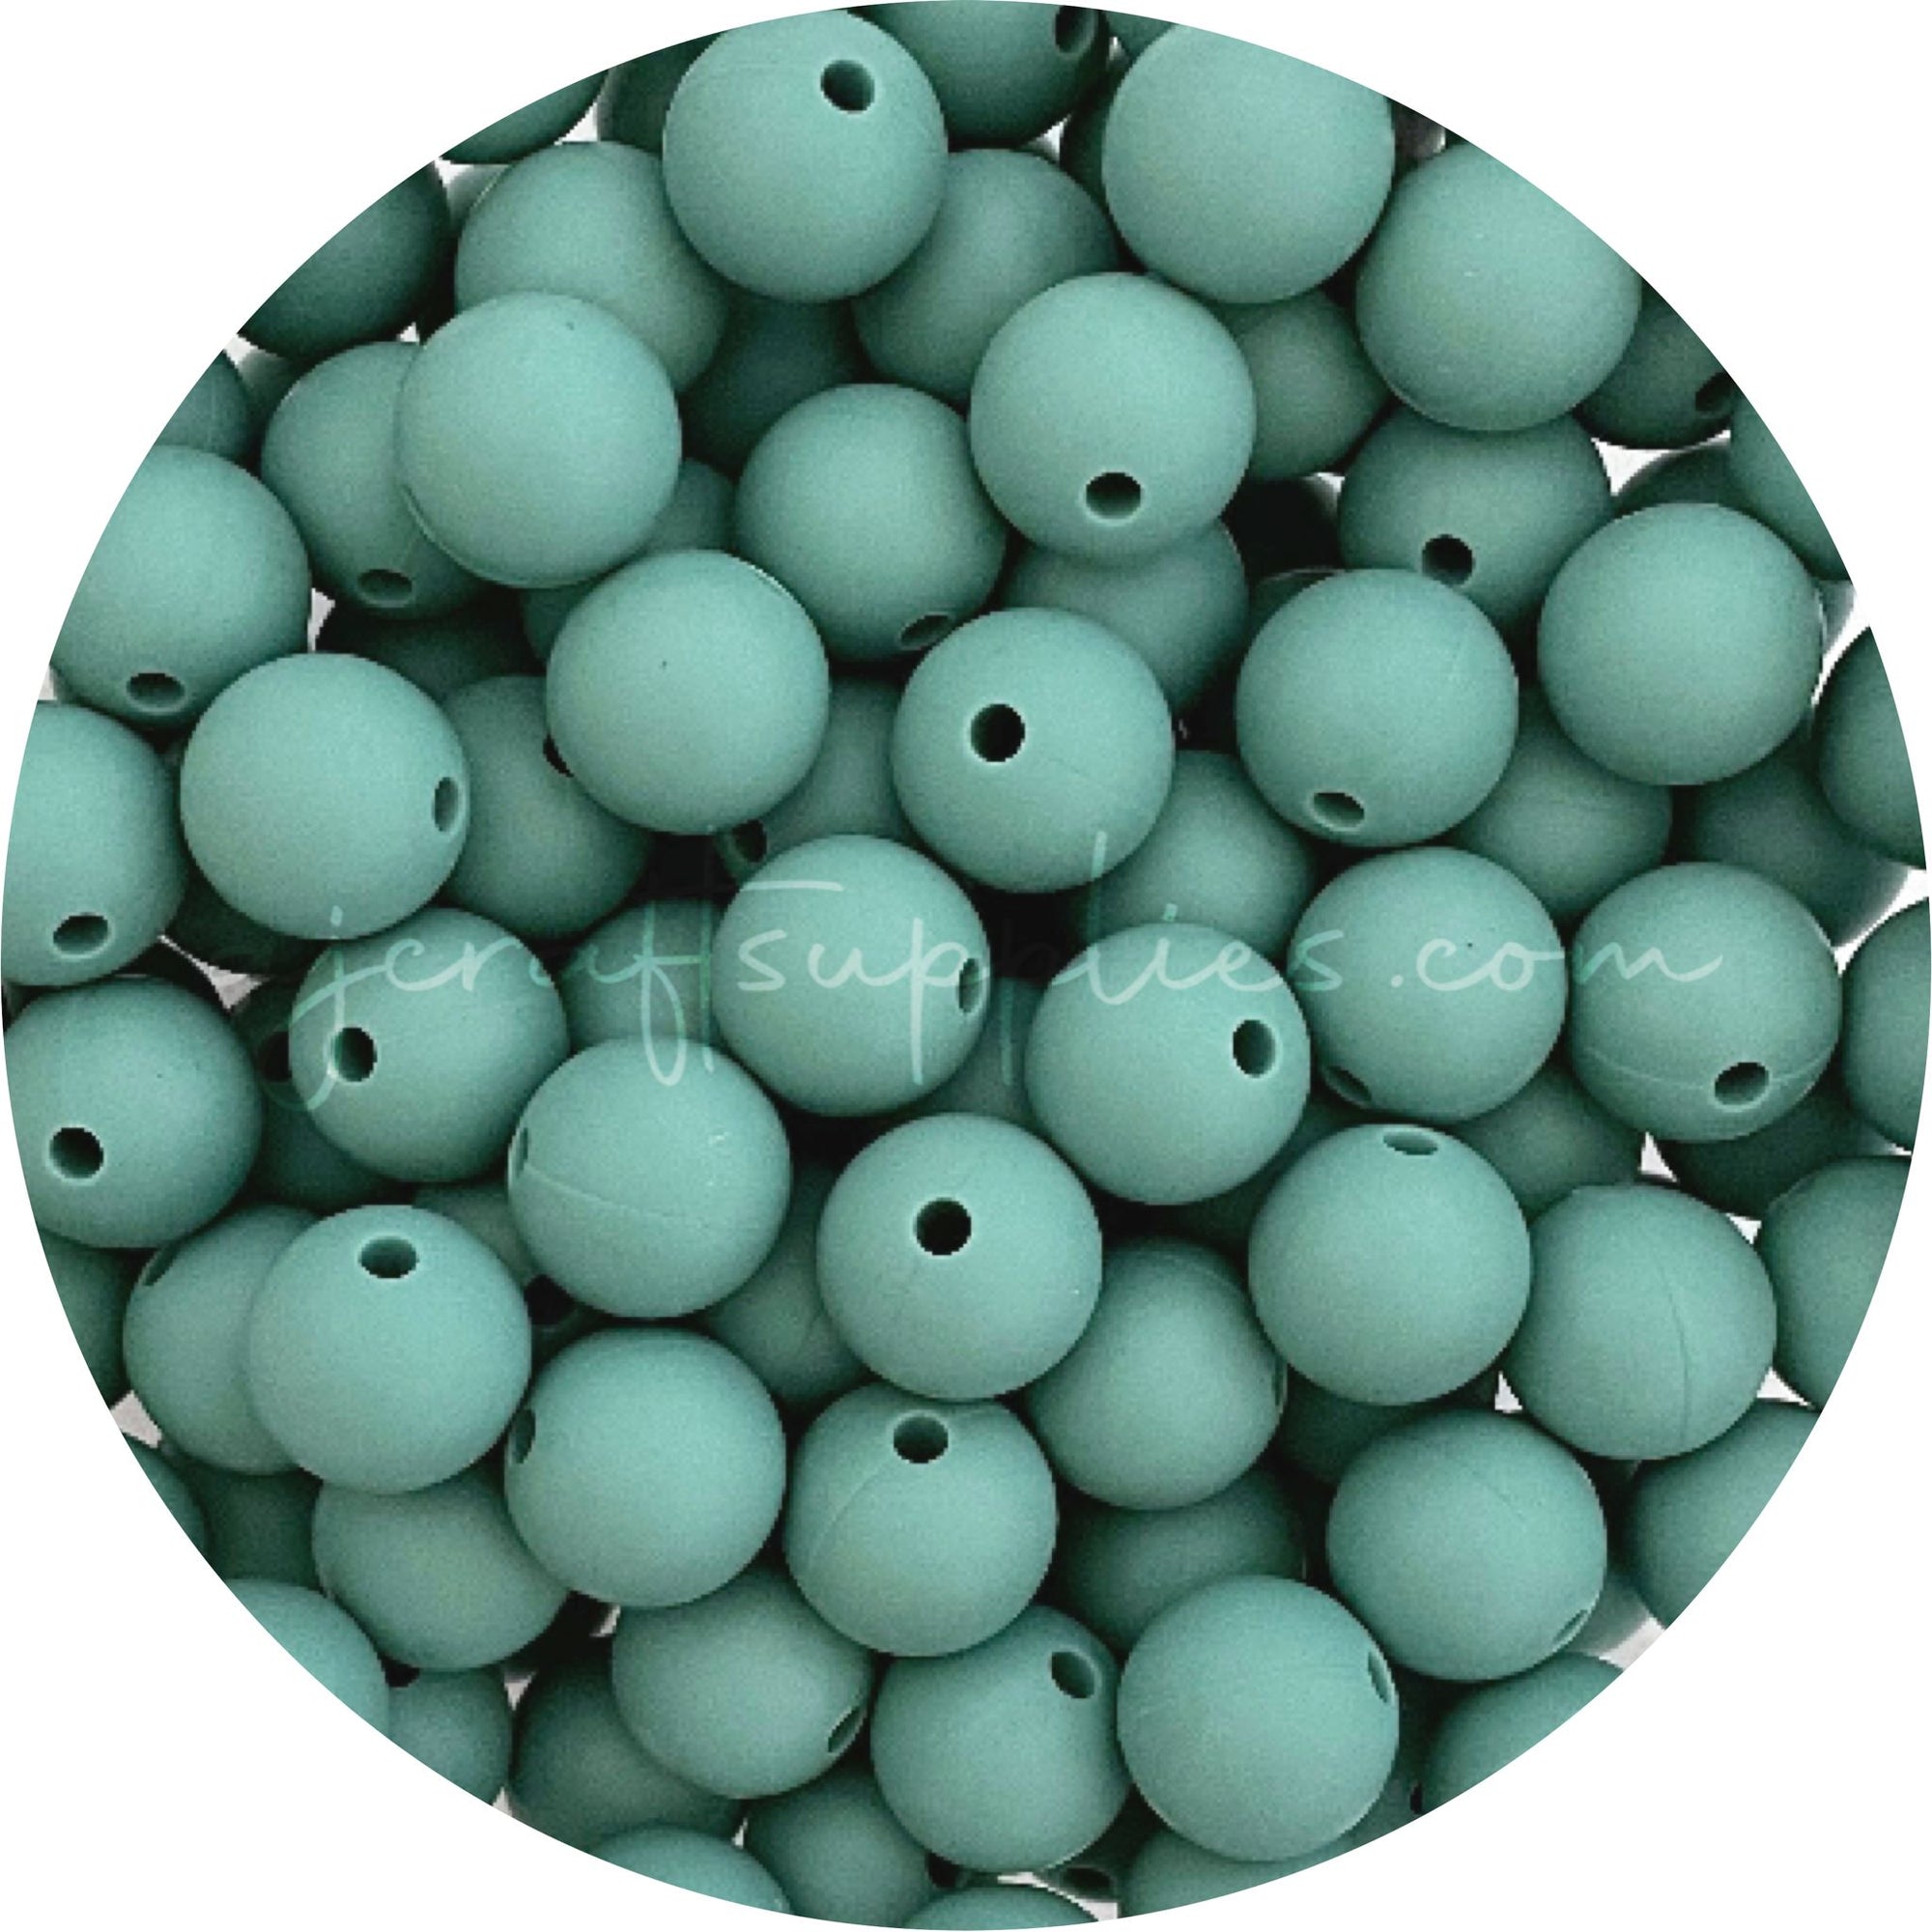 Ether Green - 12mm Round Silicone Beads - 10 beads